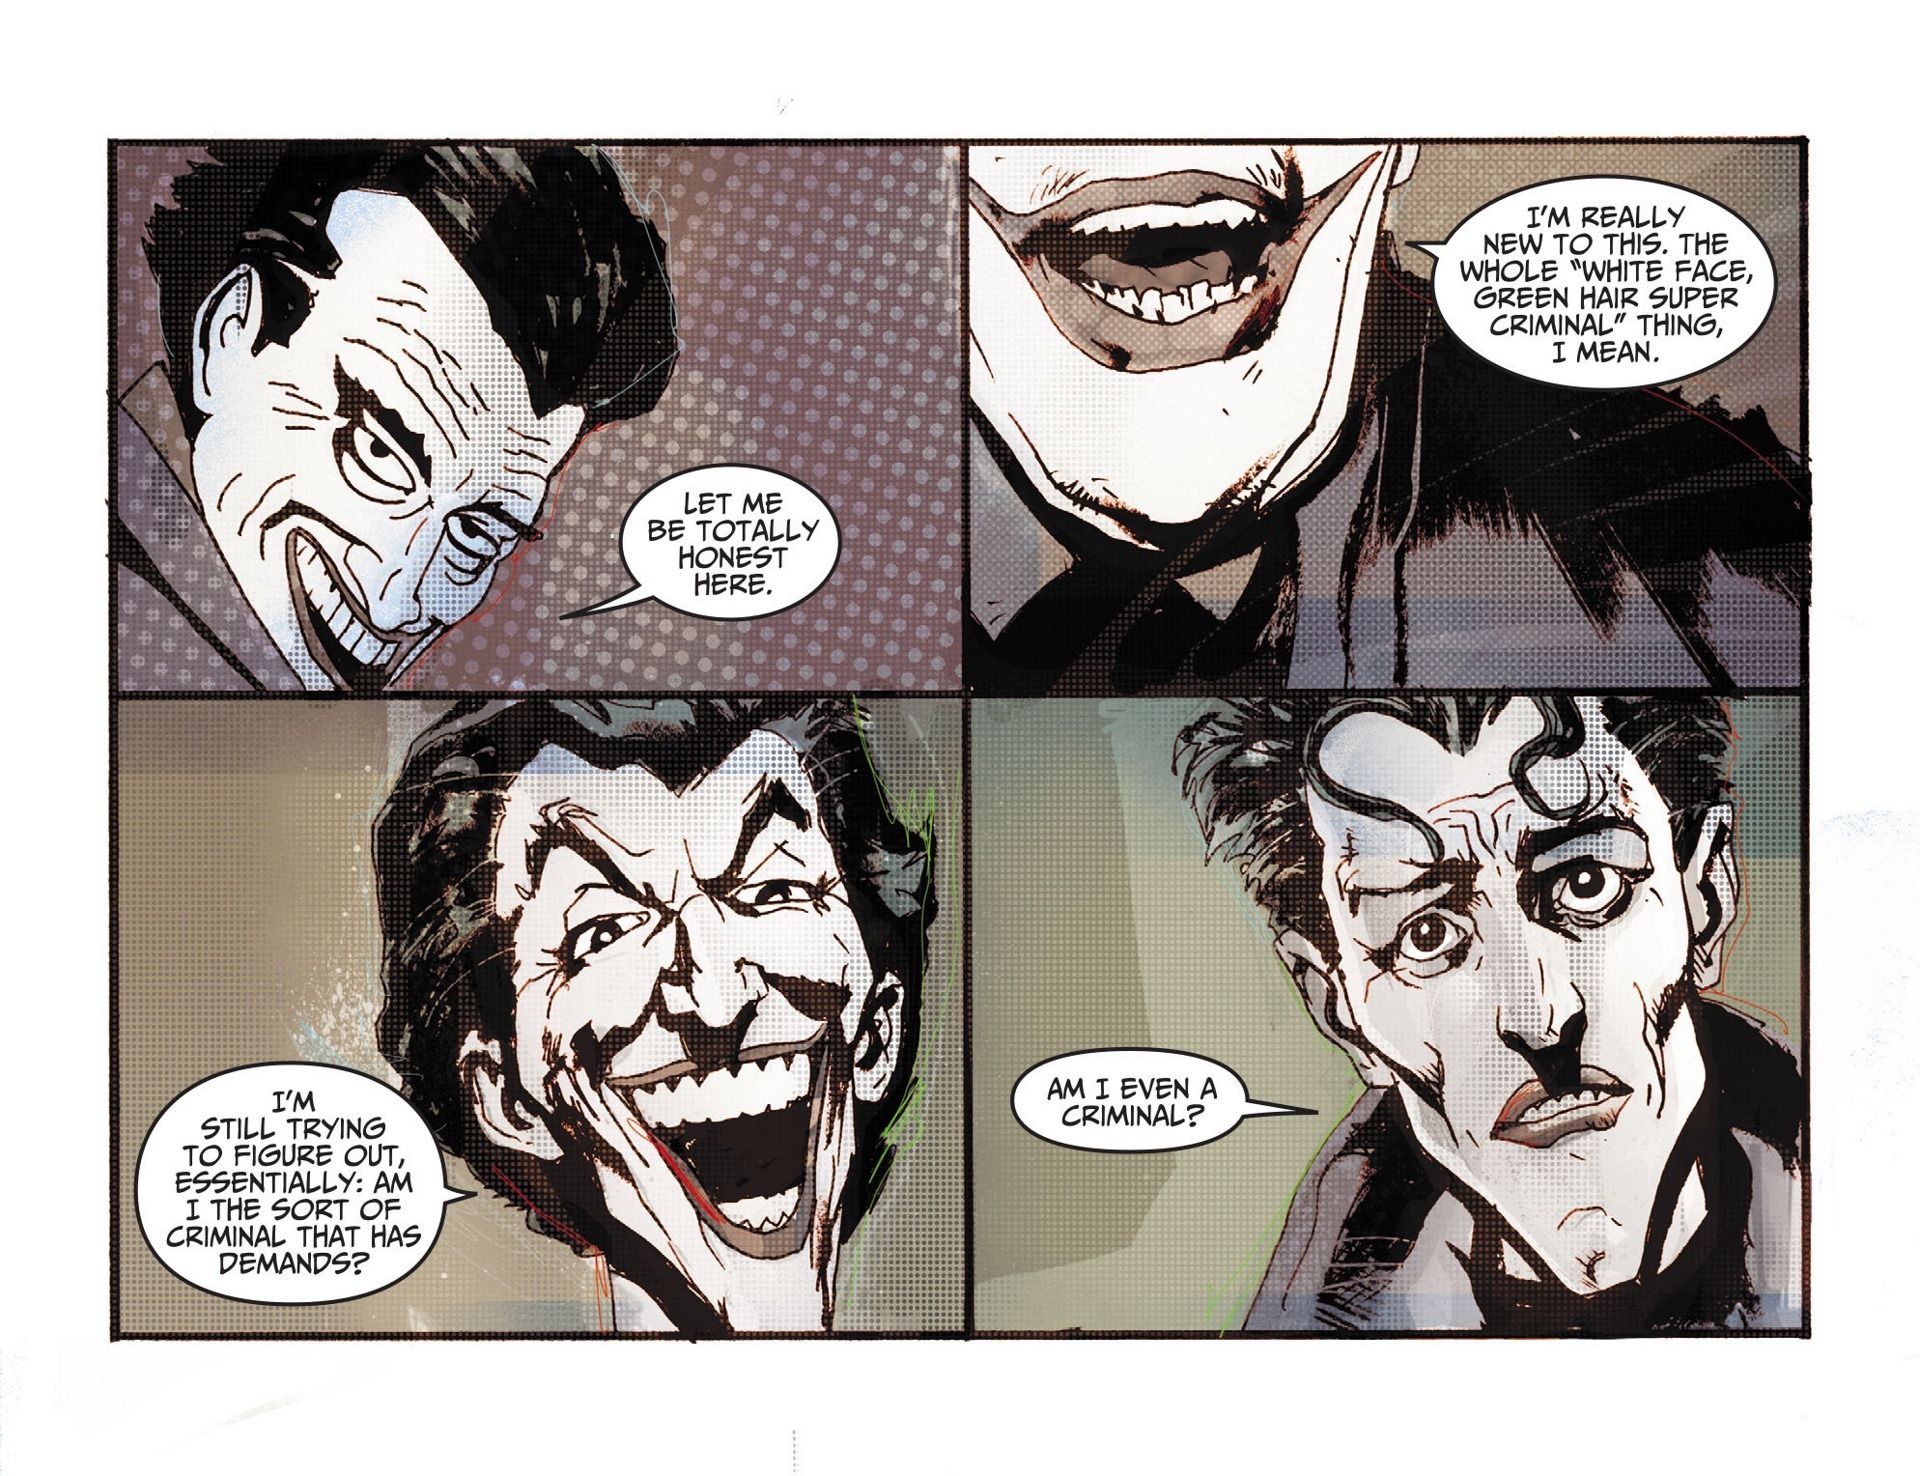 Superman Explained Pop Culture’s Joker Obsession with 1 Insightful Insult